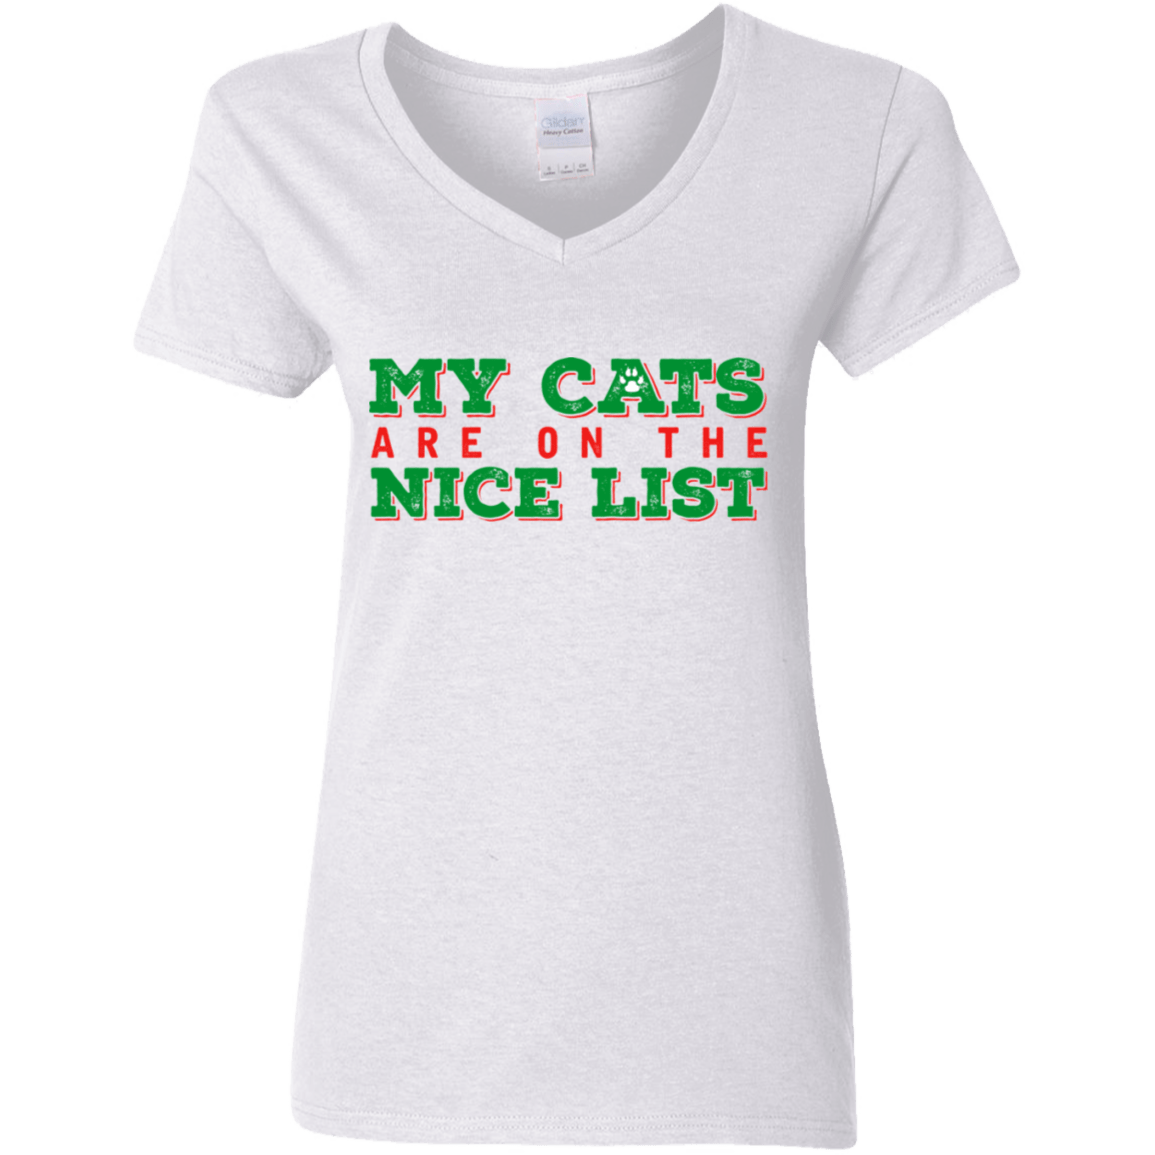 My Cats Are On The Nice List - Ladies V Neck.